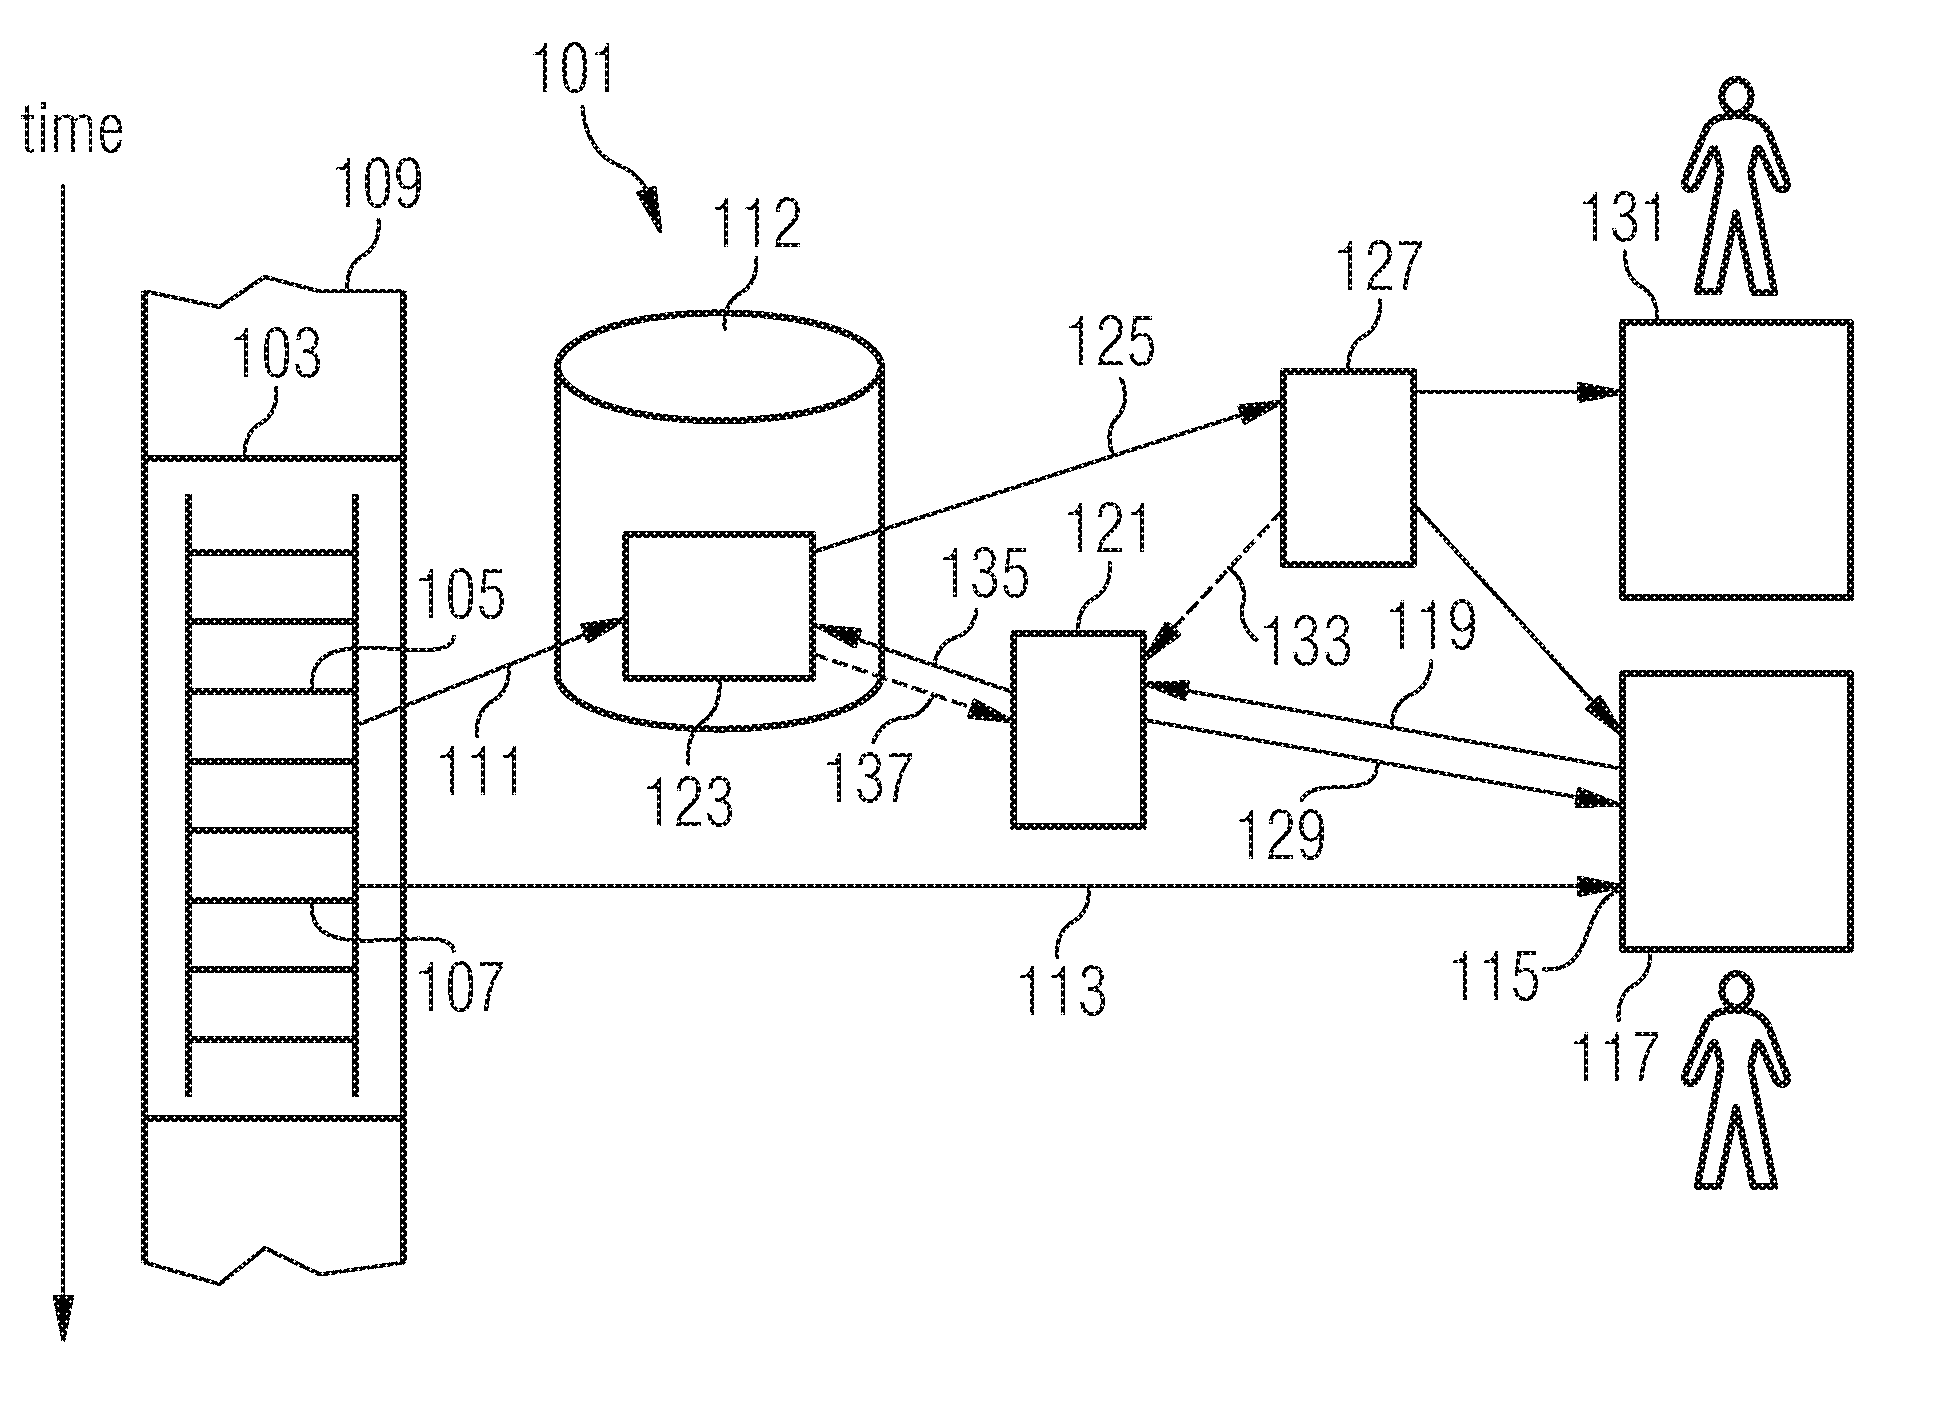 Load control for a television distribution system